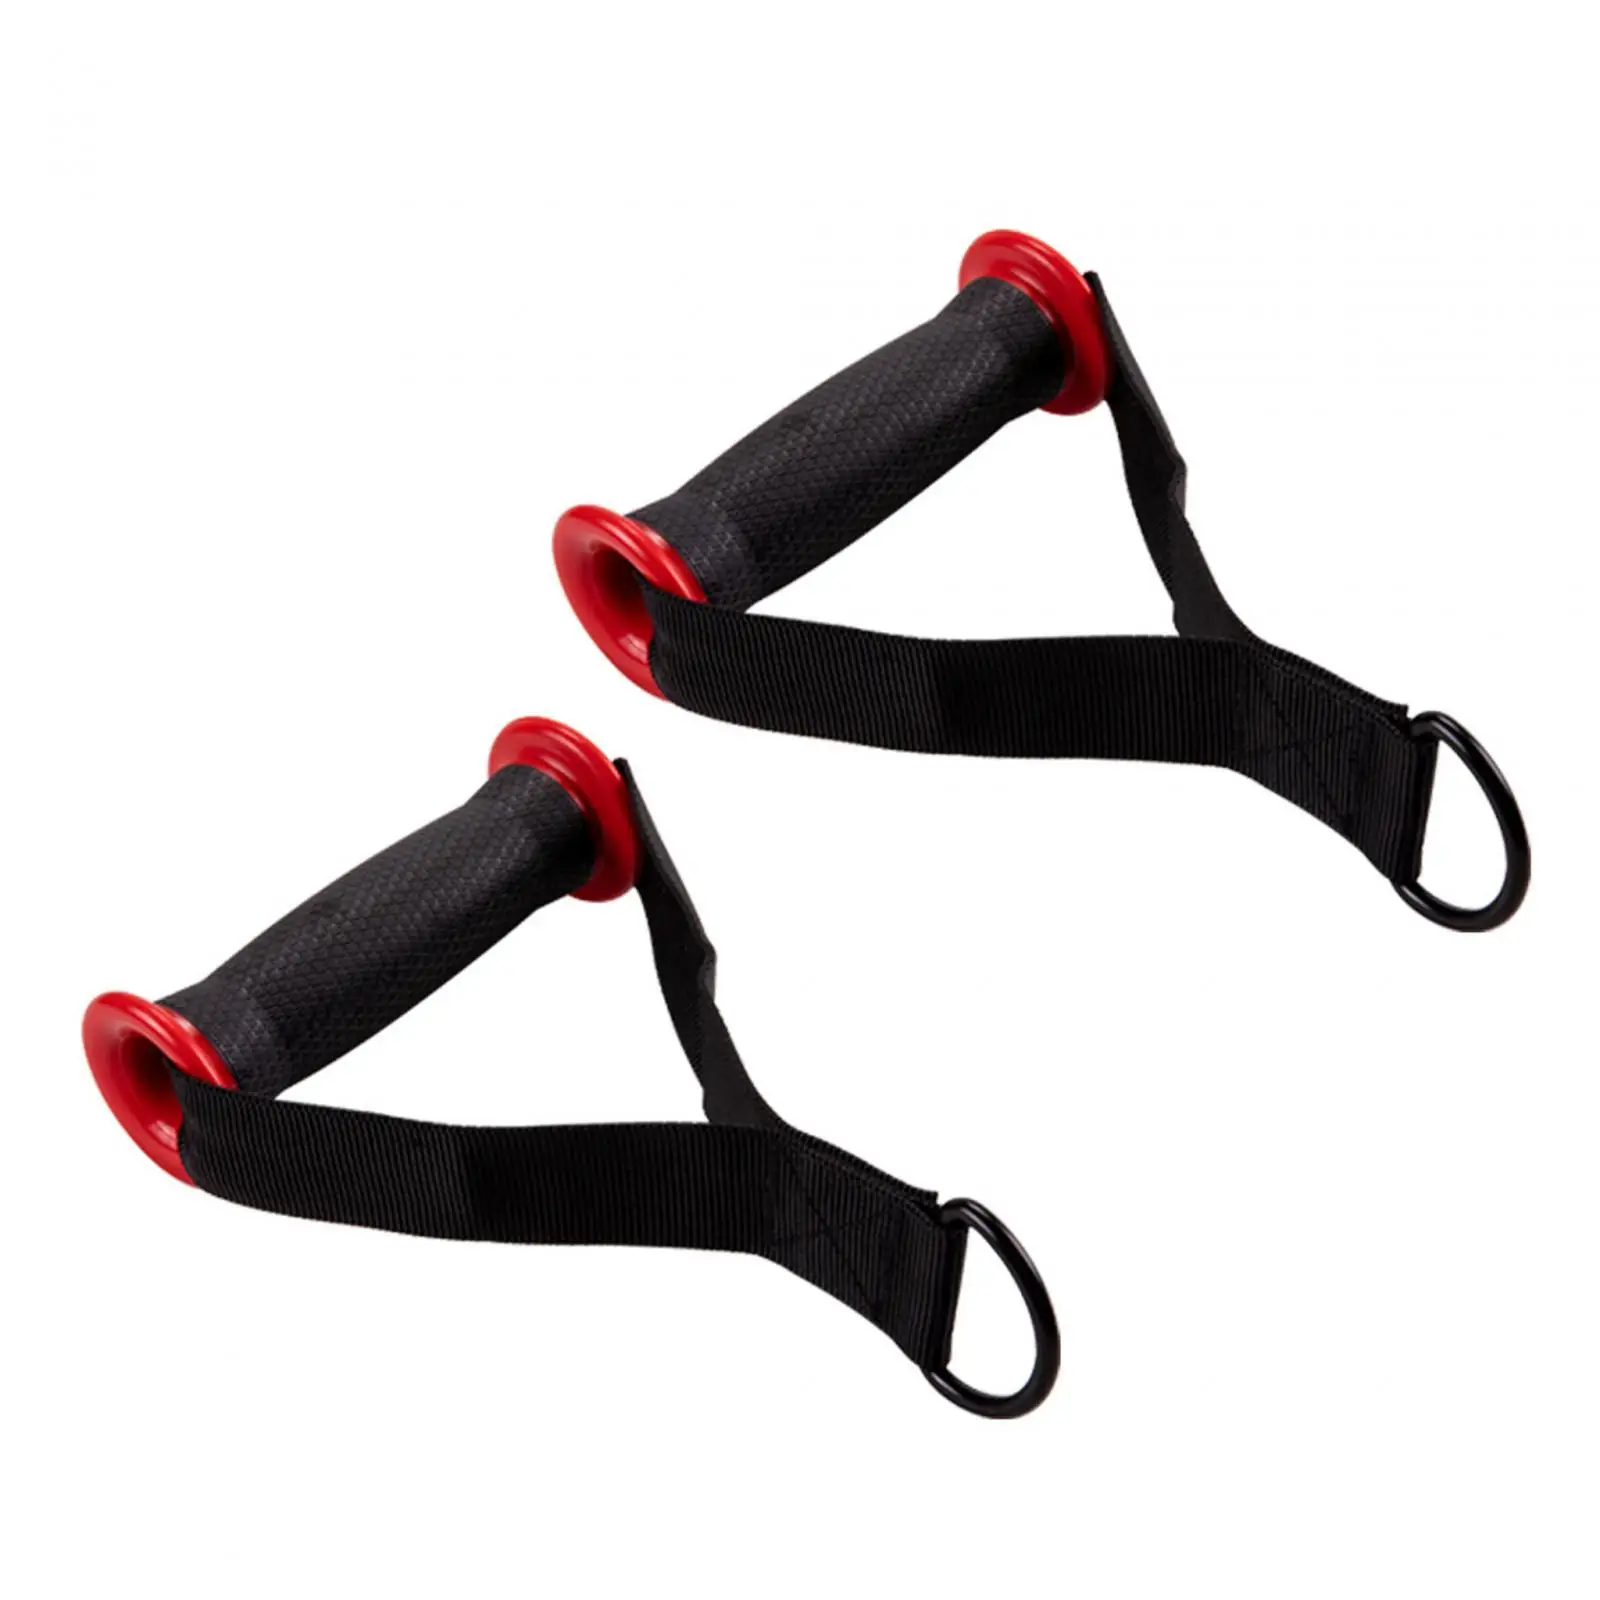 2 Pieces Gym Handle Push Pull Attachment Stirrup Gym Strength Pull Handles